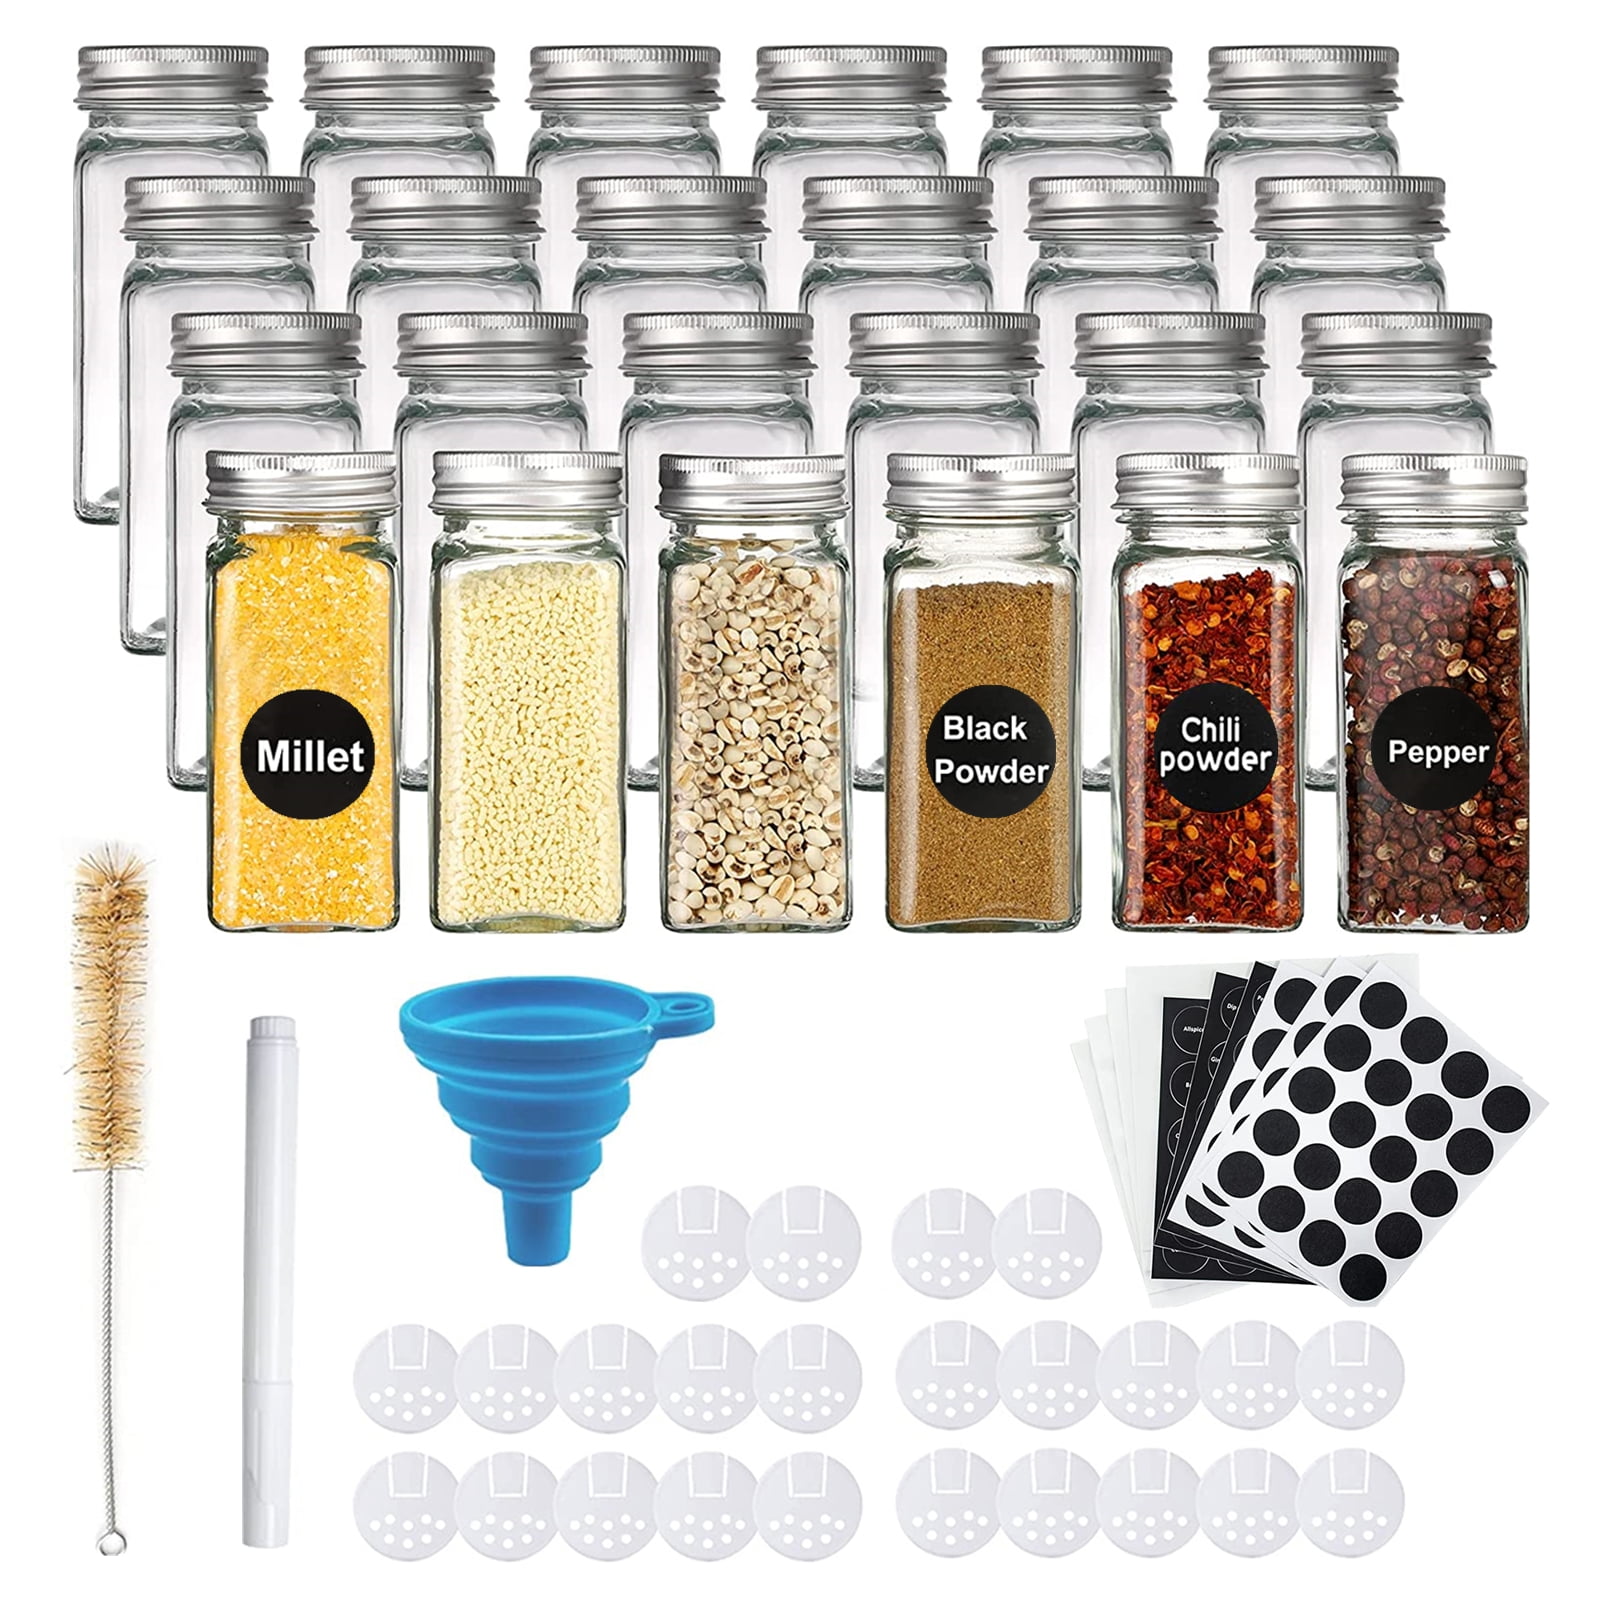 Woisut Glass Spice Jars with Label, 24 Pcs 4oz Seasoning Organizer, Empty  Square Spice Containers Bottles with Shaker Lids, Collapsible Funnel, Brush